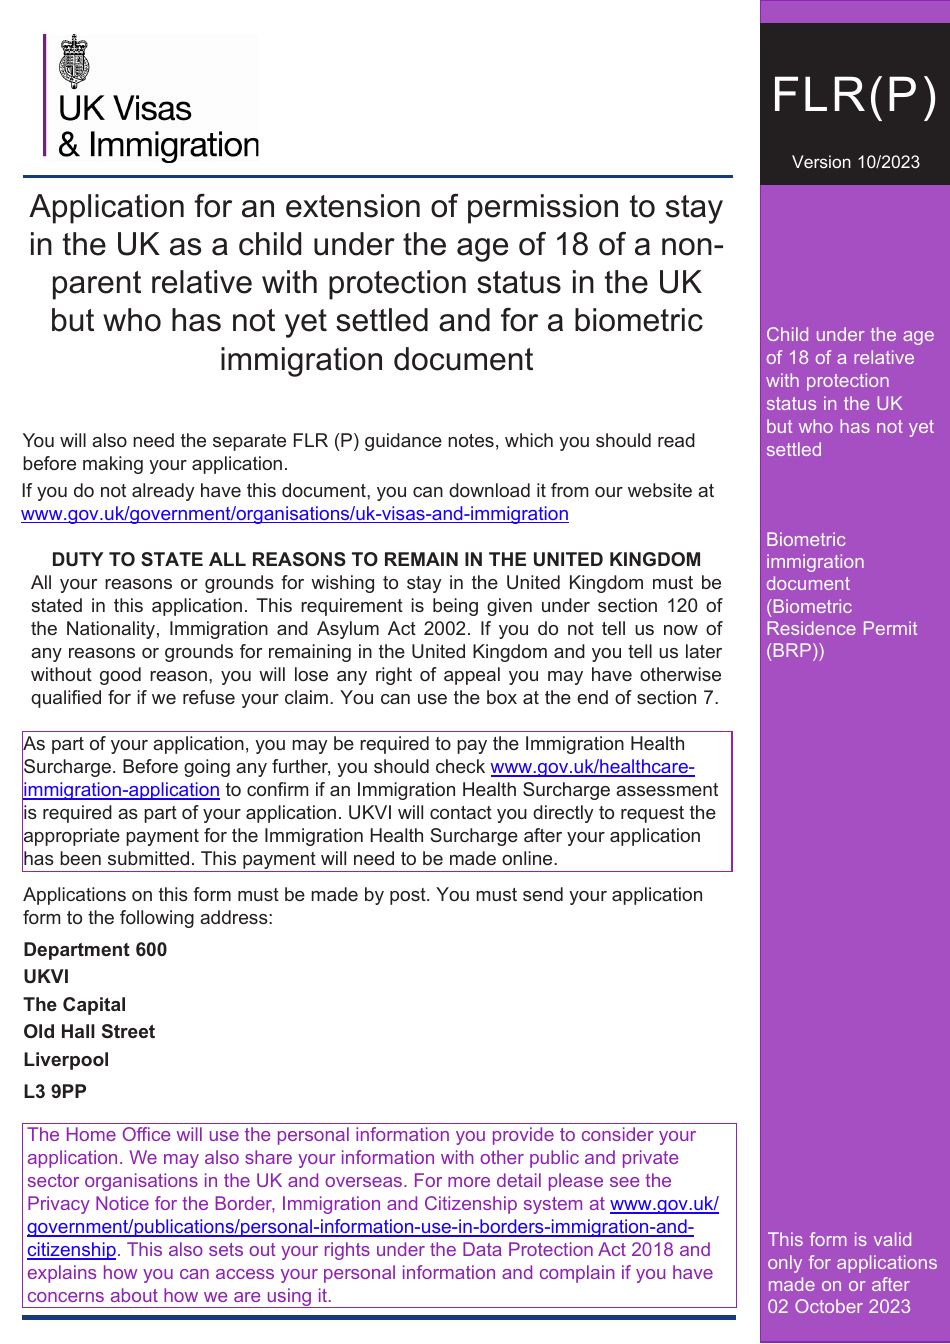 Form FLR(P) Application for an Extension of Stay in the UK as a Child Under the Age of 18 of a Relative With Limited Leave to Enter or Remain in the UK as a Refugee or Beneficiary of Humanitarian Protection and for a Biometric Immigration Document - United Kingdom, Page 1